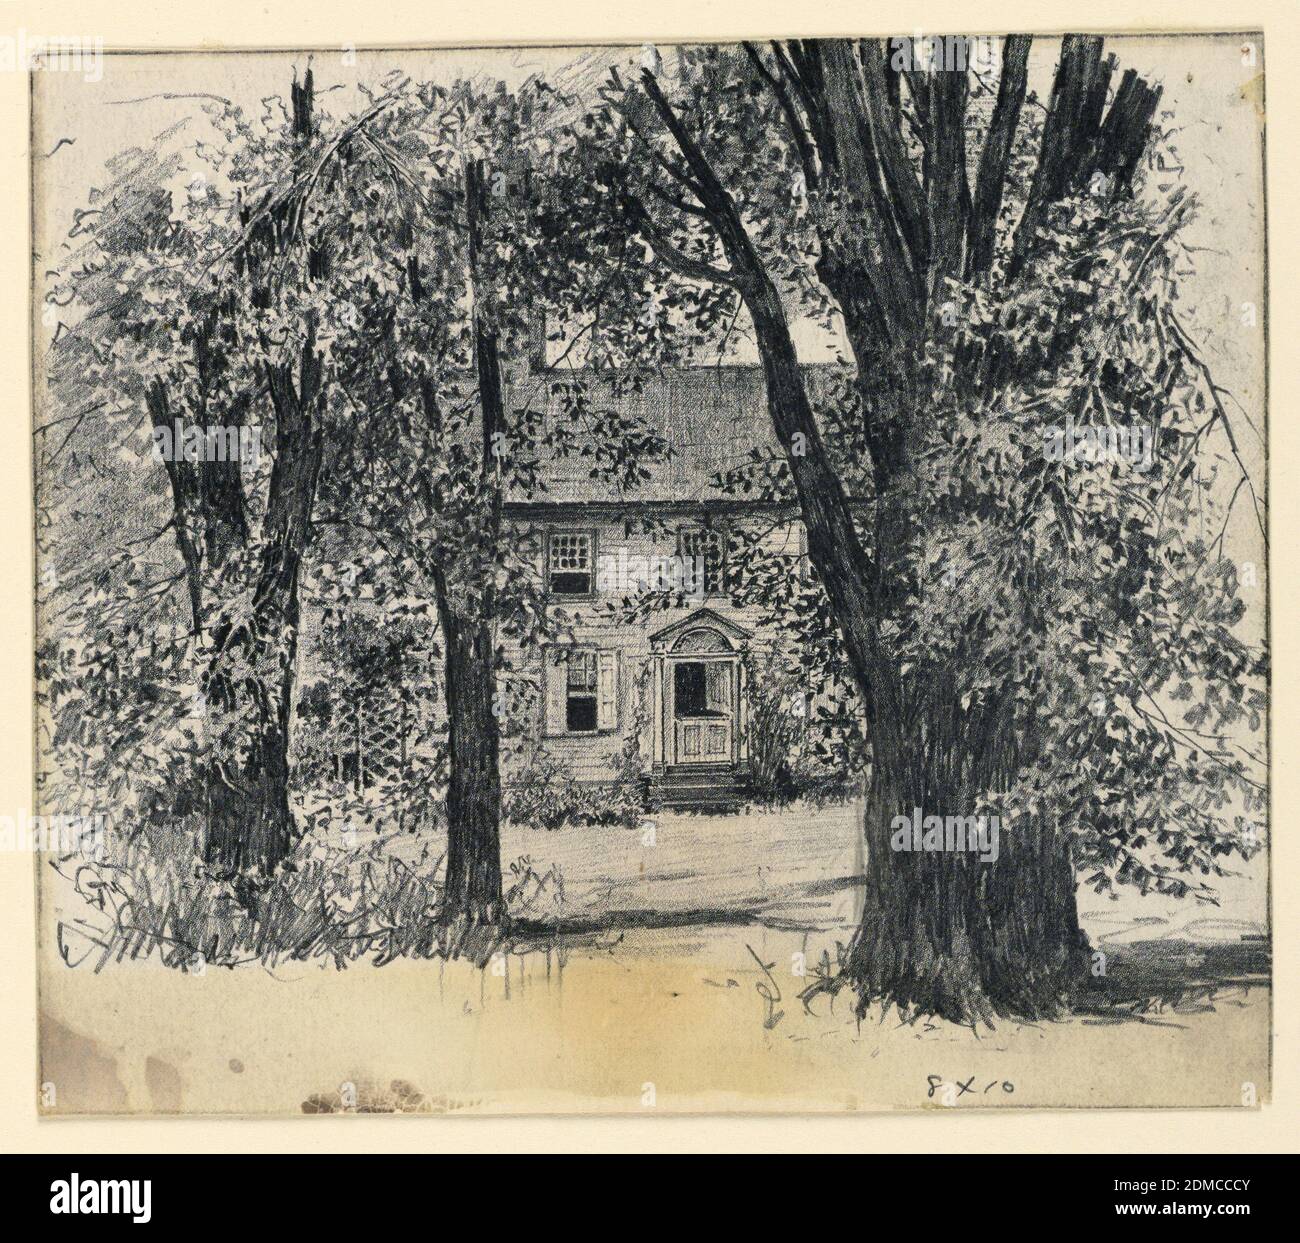 Point Lookout, Mary A. Hallock Foote, American, 1847–1938, Graphite on cream heavy wove paper, View of a house with Dutch door (top portion is shown open) through a grove of trees., From Catalogue Card: Horizontal rectangle. View of the exterior of a Colonial type house, seen through the trees. The entrance has a portico and a dutch doorway, partially open., USA, 1883, landscapes, Drawing Stock Photo